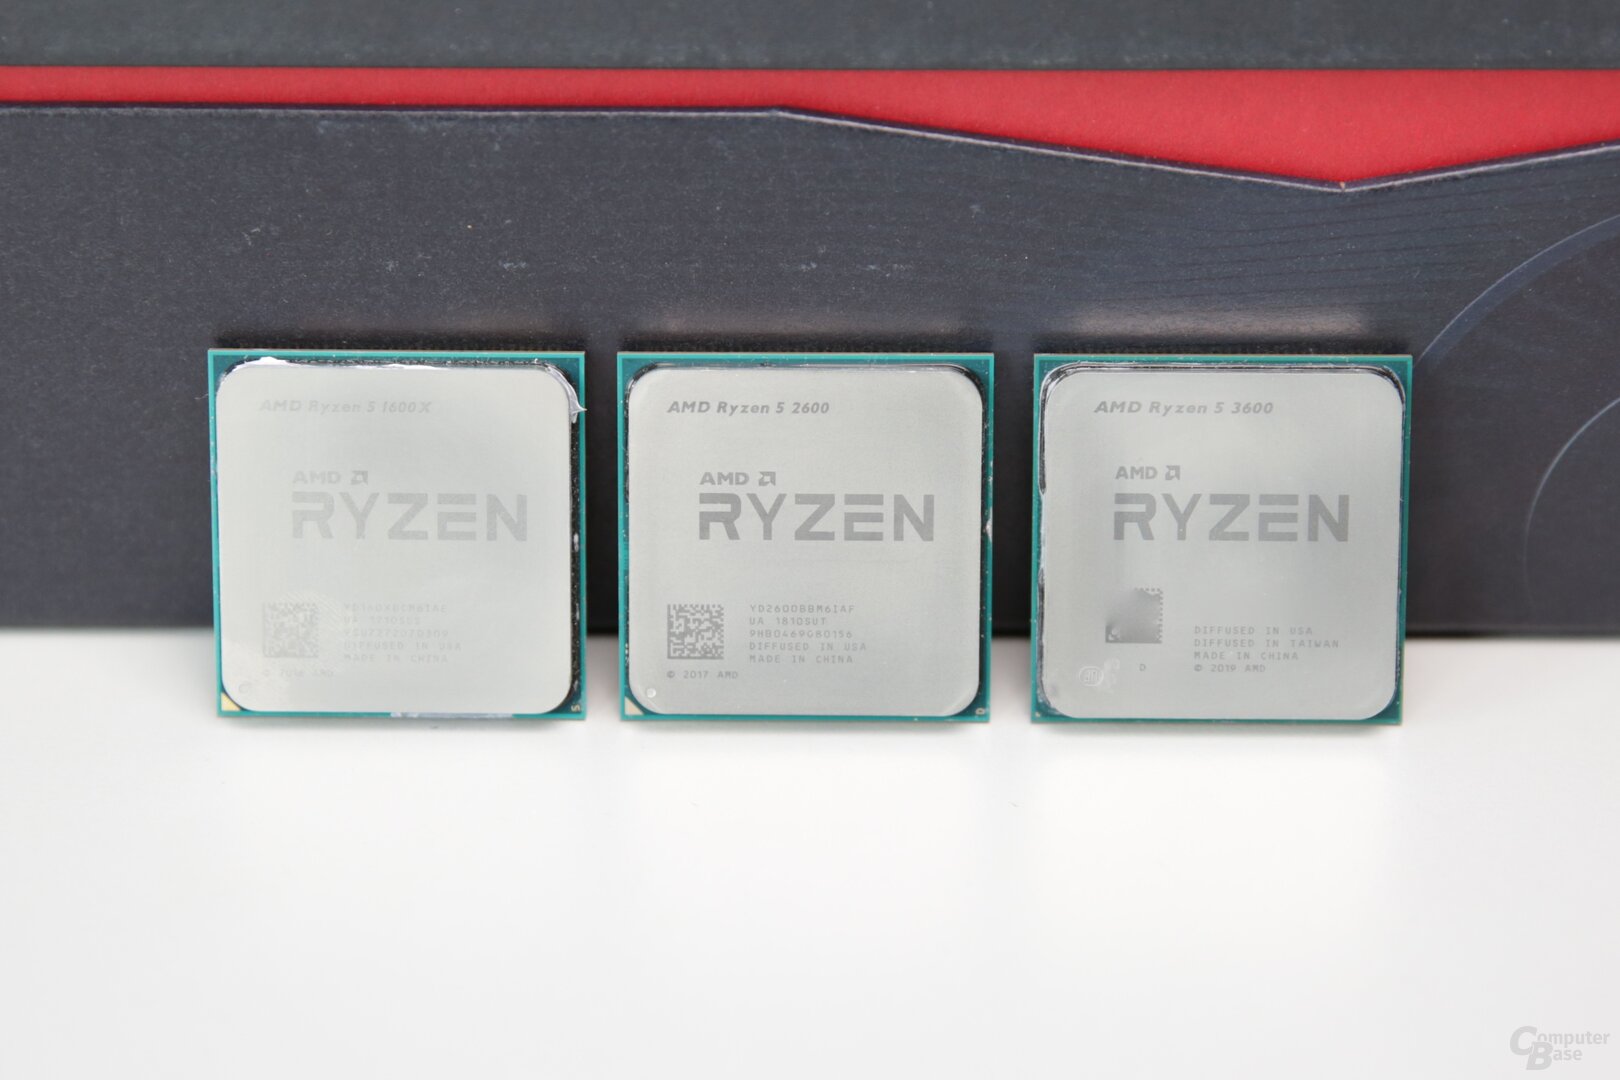 Three generations of Zen with 6 cores in comparison